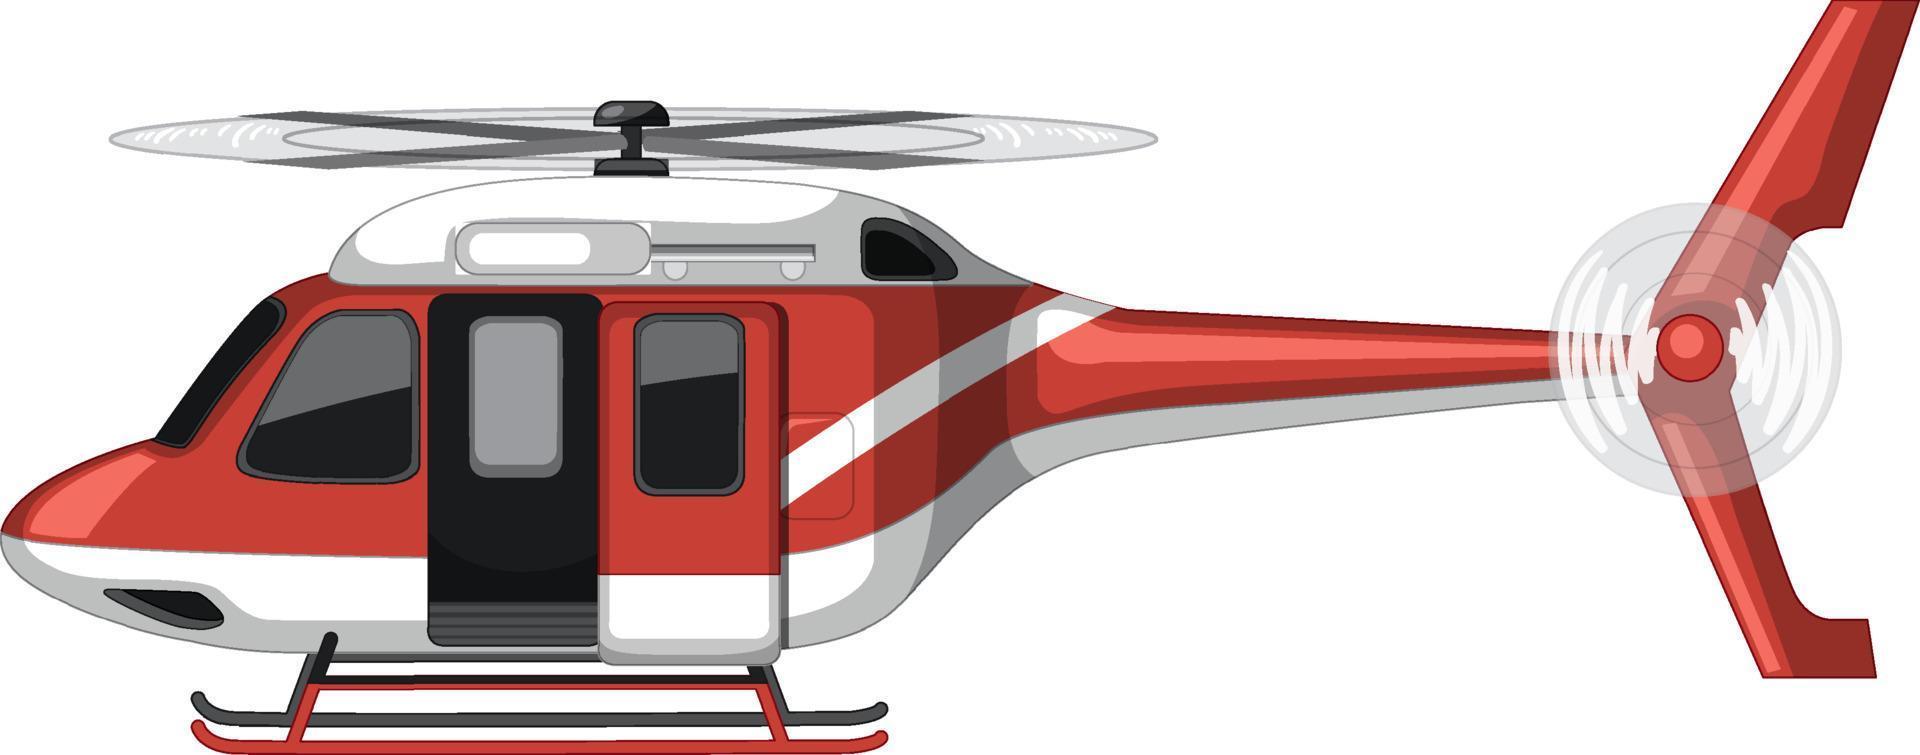 Emergency helicopter on white background vector